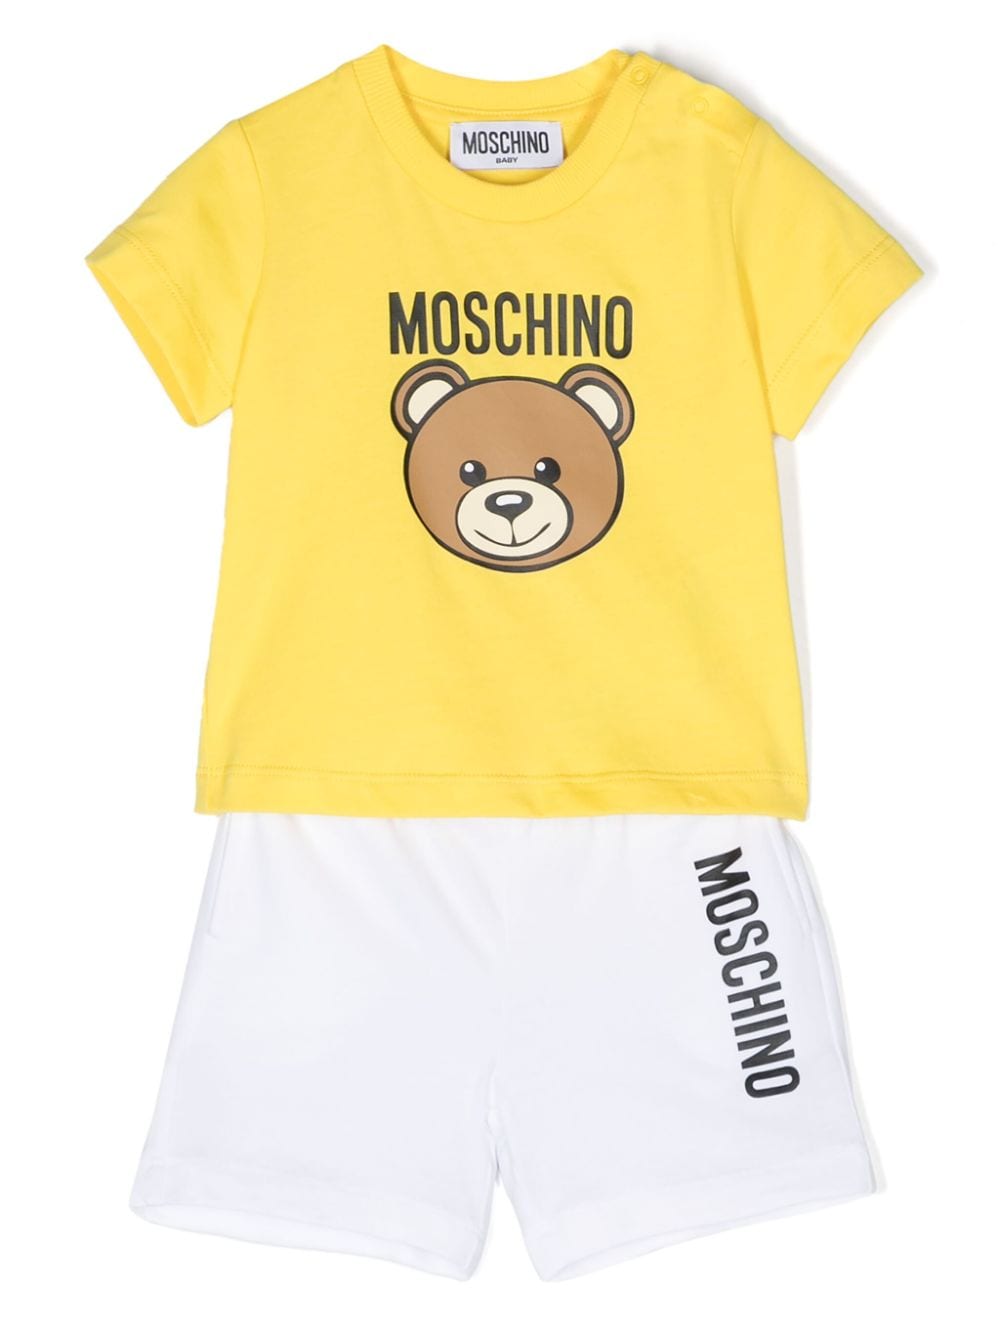 Yellow and white sports outfit for newborns